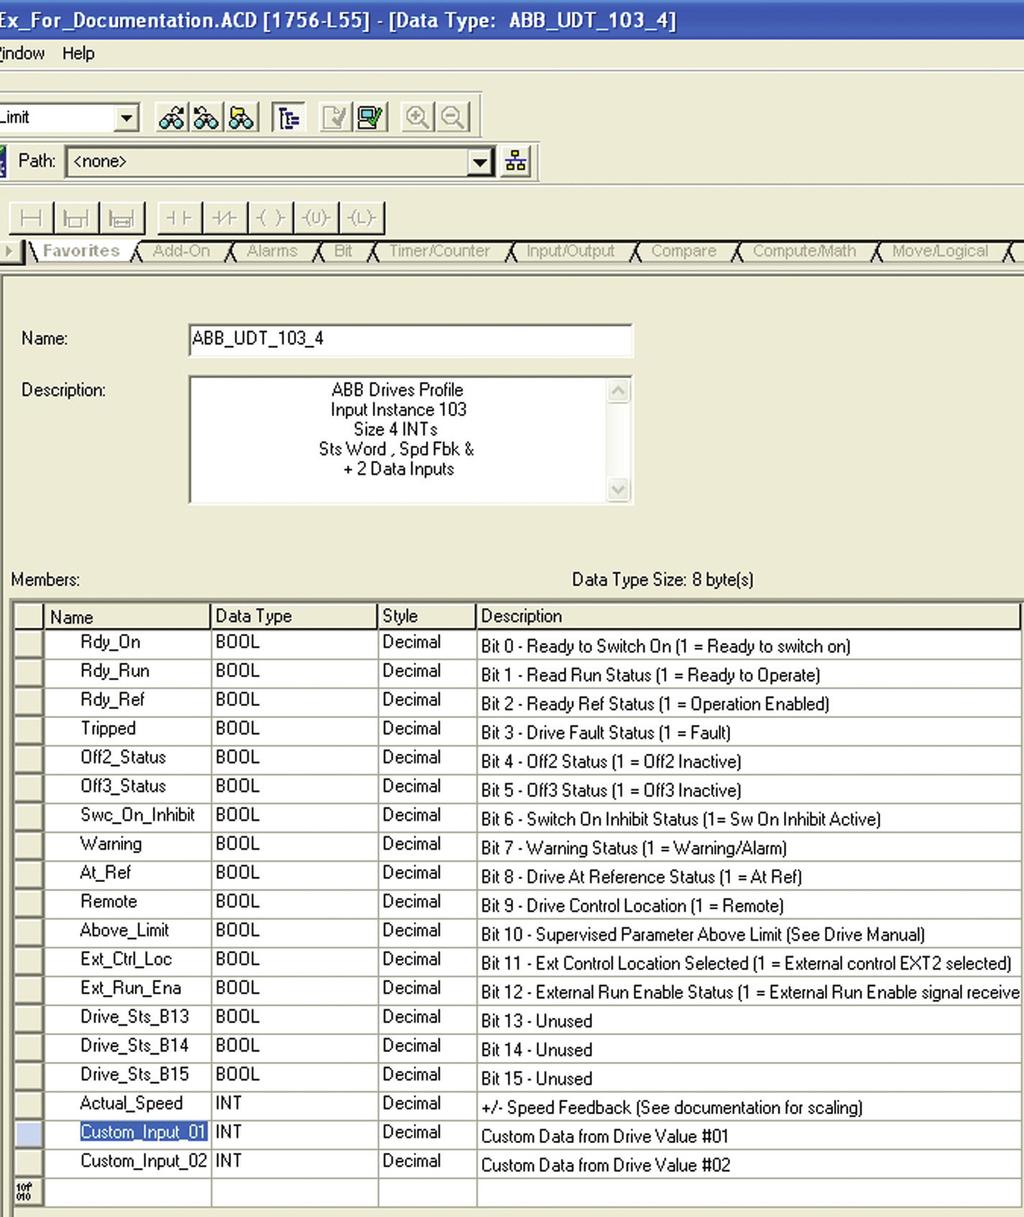 5. User Defined Data Type ABB_UDT_102_4 word 3 and word 4 are custom data outputs. Change the name of custom data out 1 and 2.